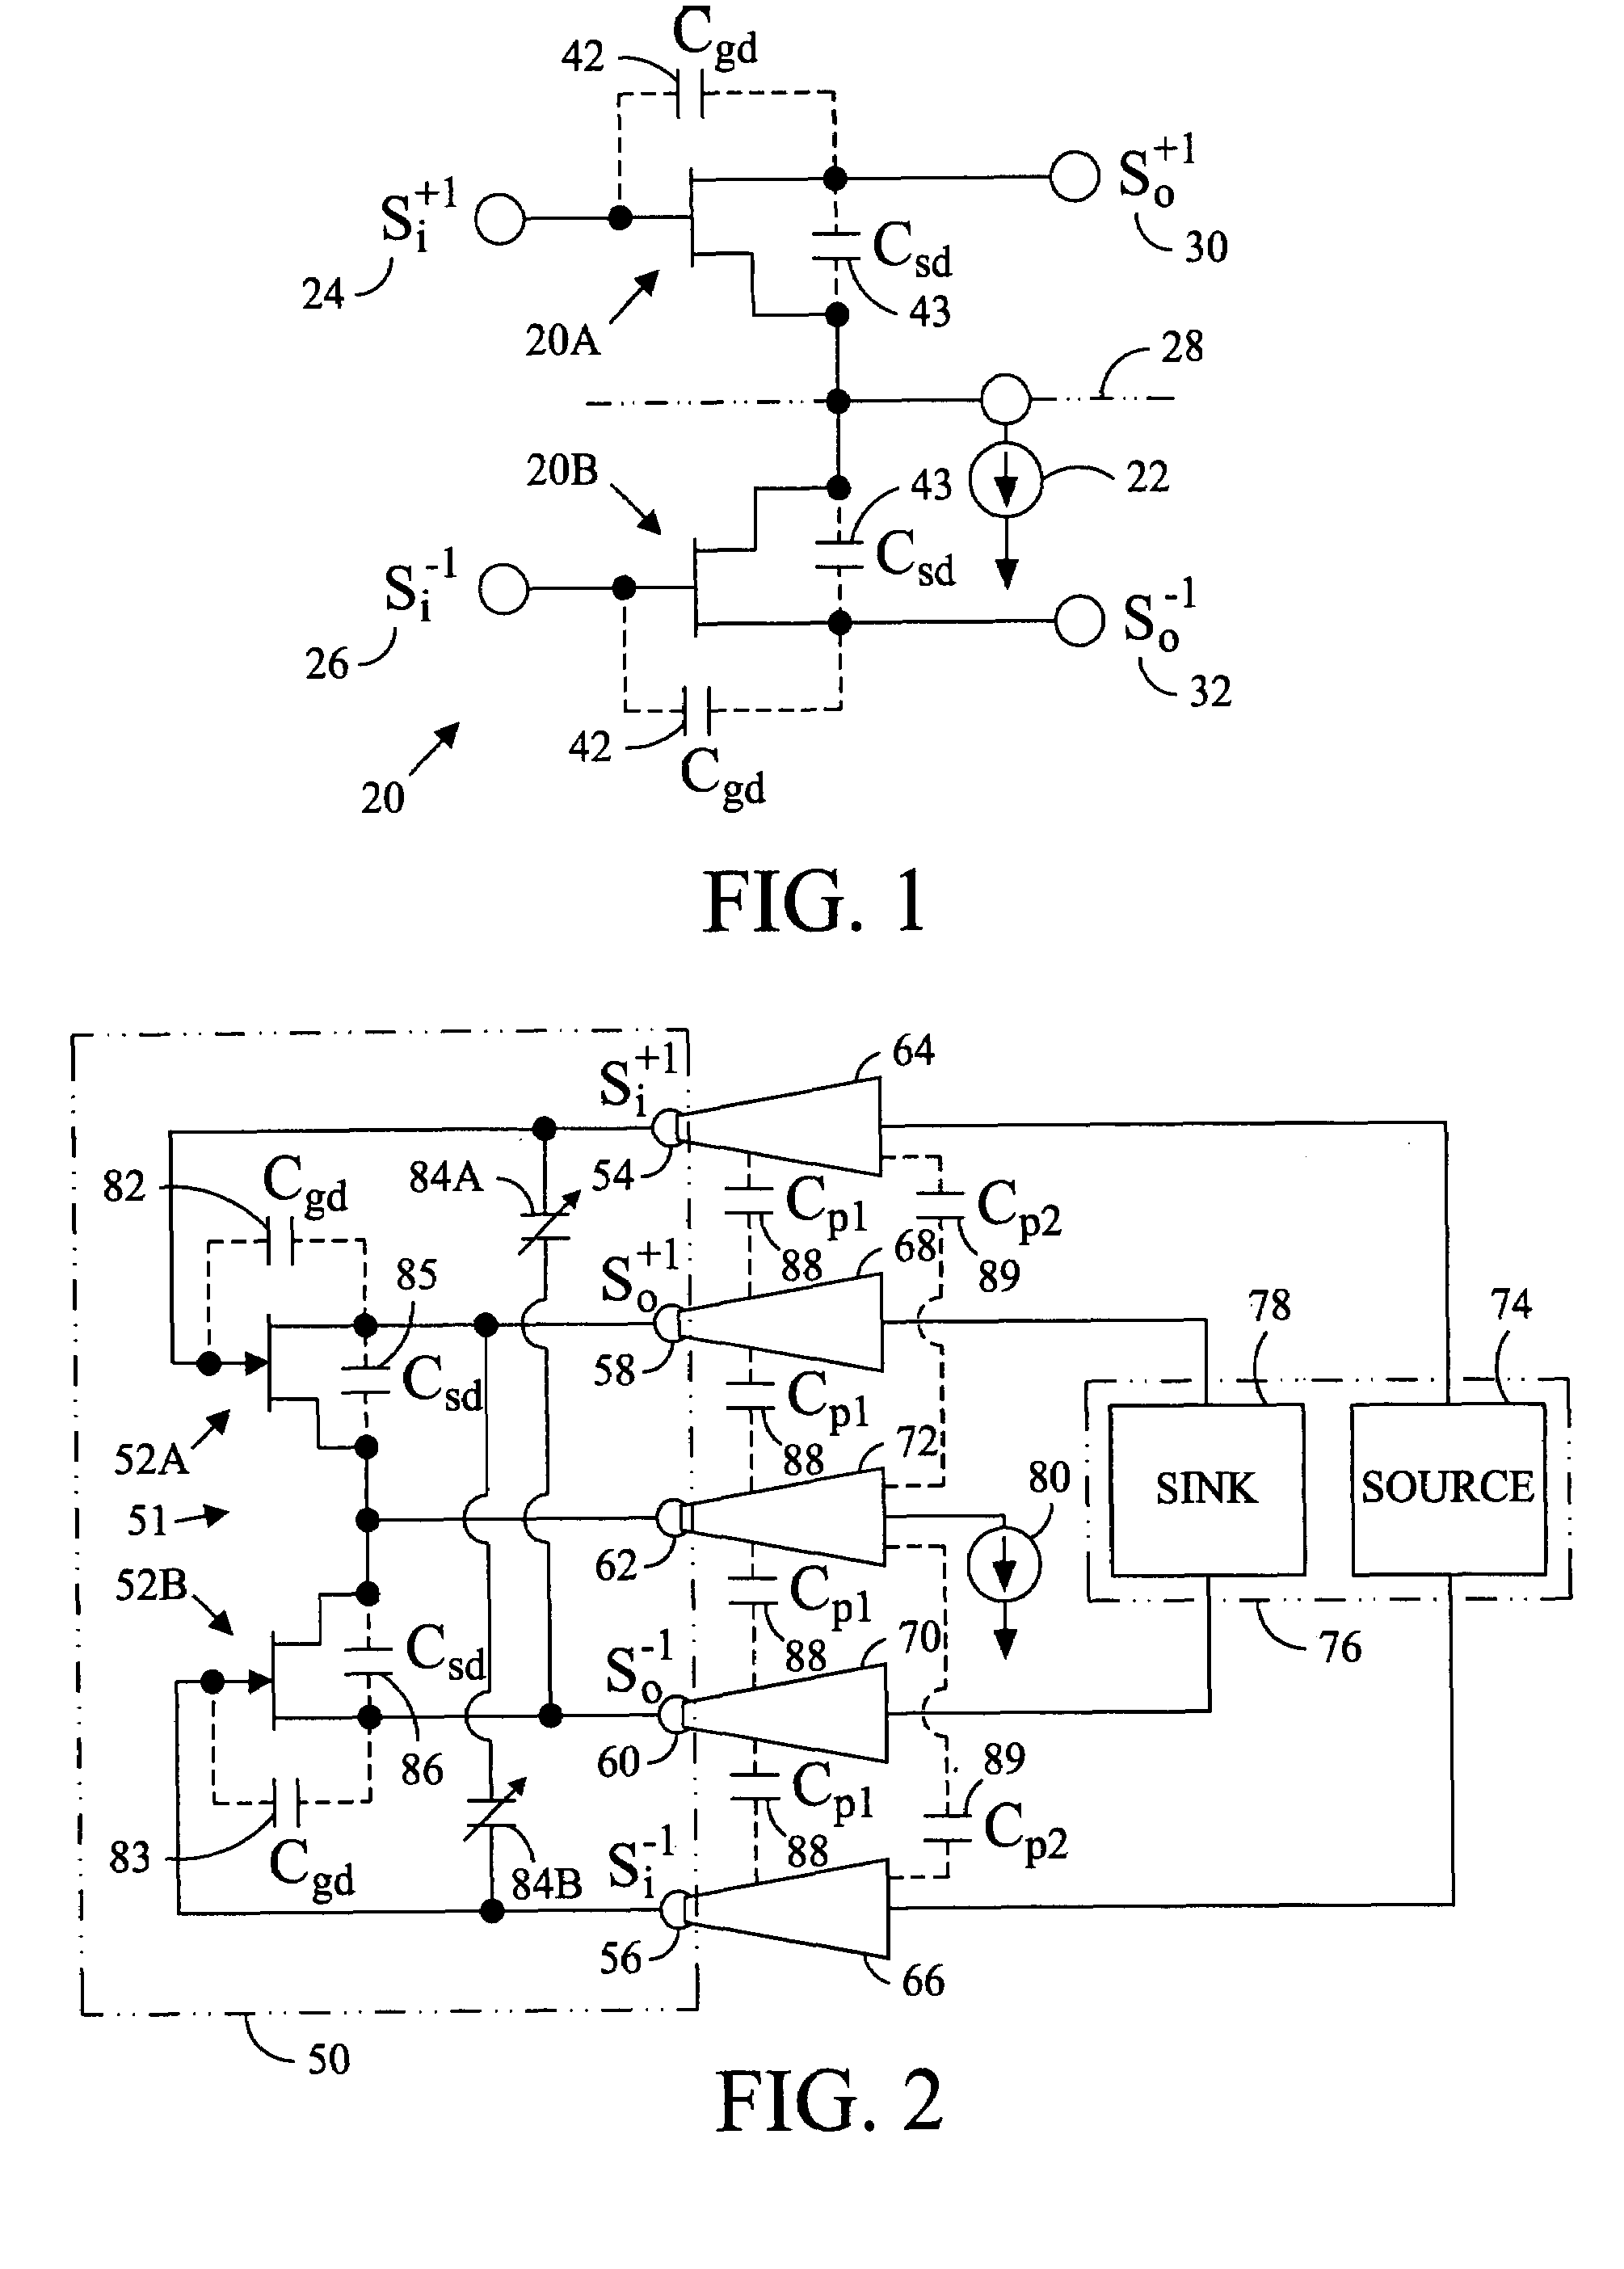 Test structure and probe for differential signals